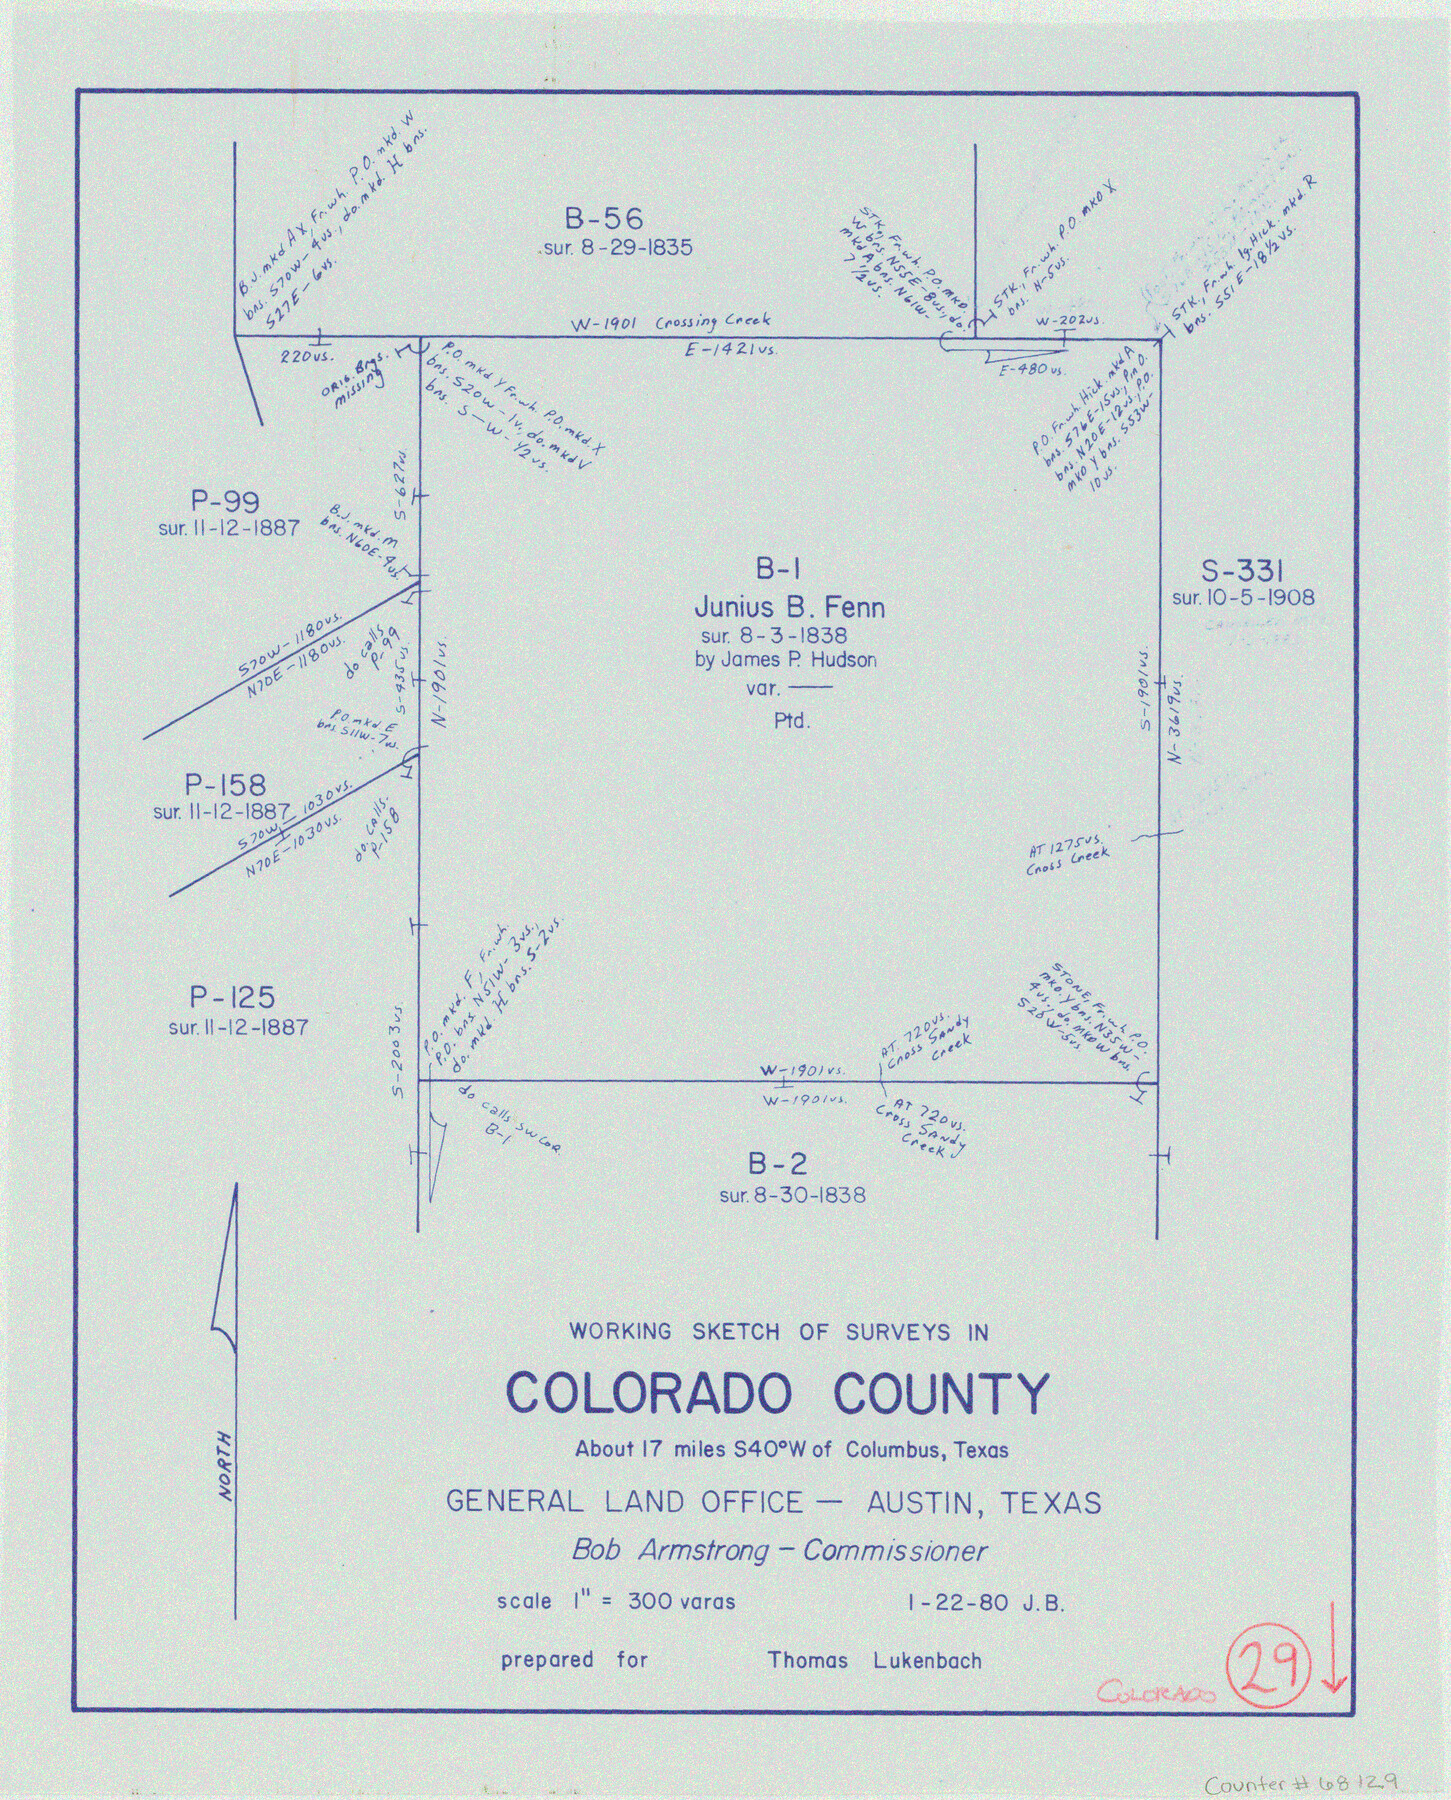 68129, Colorado County Working Sketch 29, General Map Collection